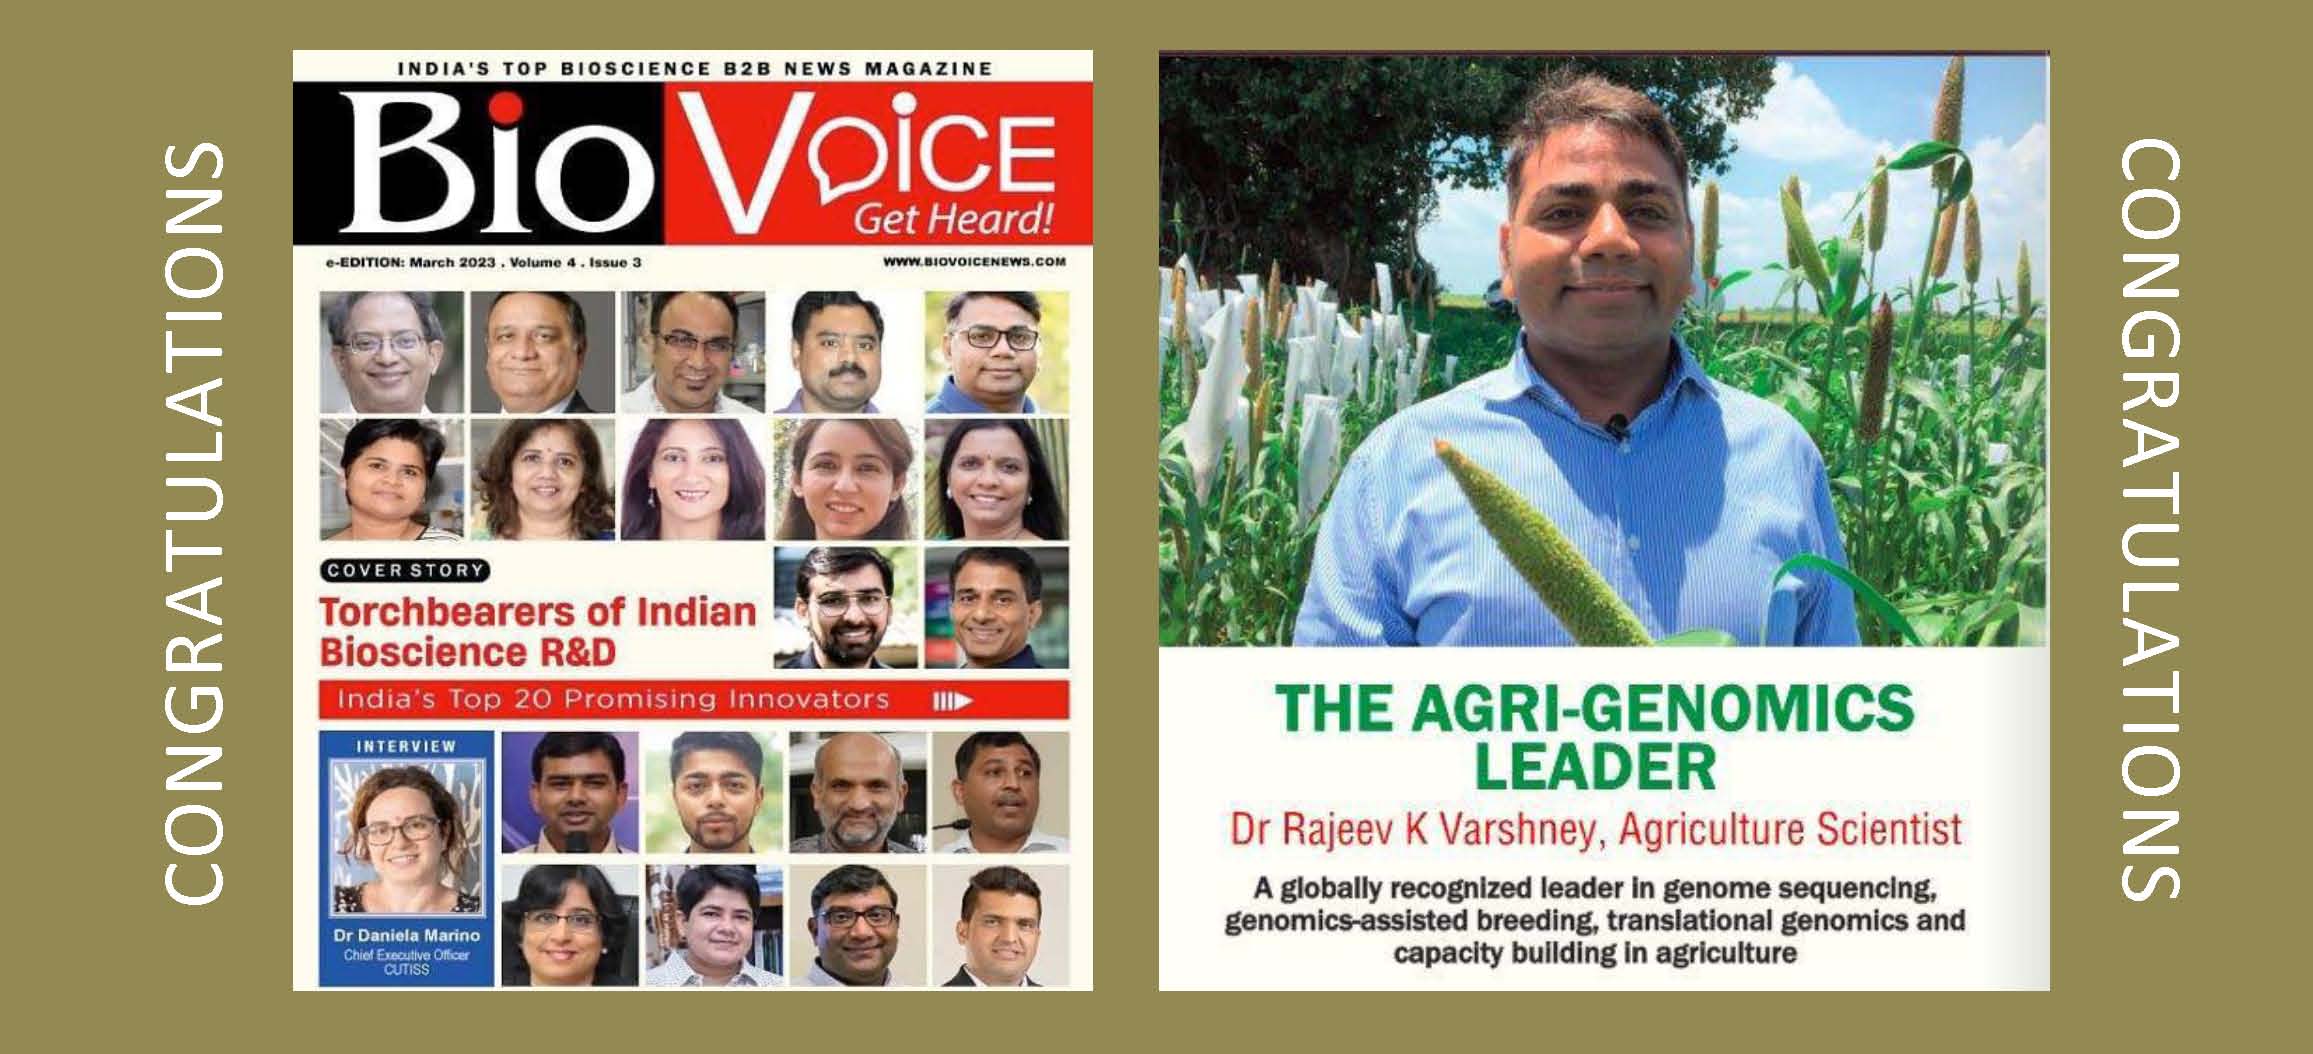 Dr. Rajeev K. Varshney, Foreign Secretary of the Academy featured amongst The Torchbearers of Indian Bioscience - Profiling India’s Top 20 Promising Bioscience Innovators